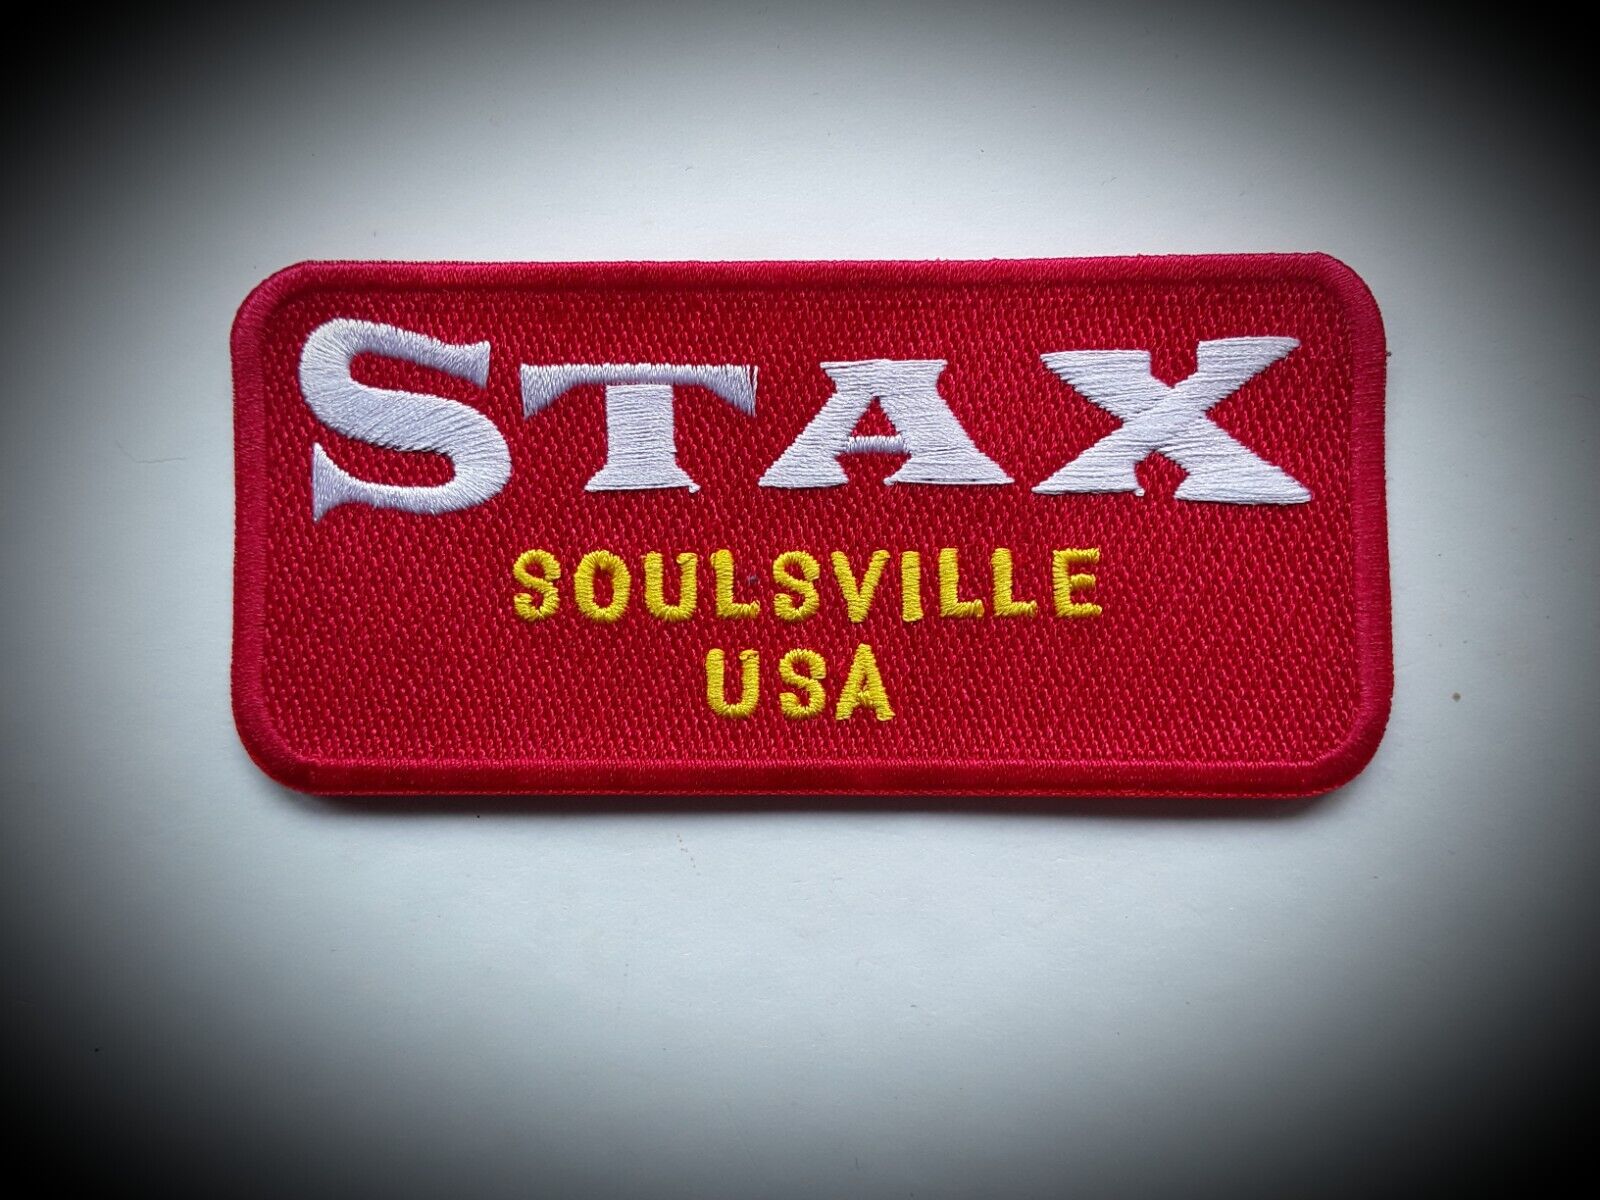 STAX AMERICAN RECORD LABEL SOUL GOSPEL BLUES FUNK EMBROIDERED PATCH UK SELLER 